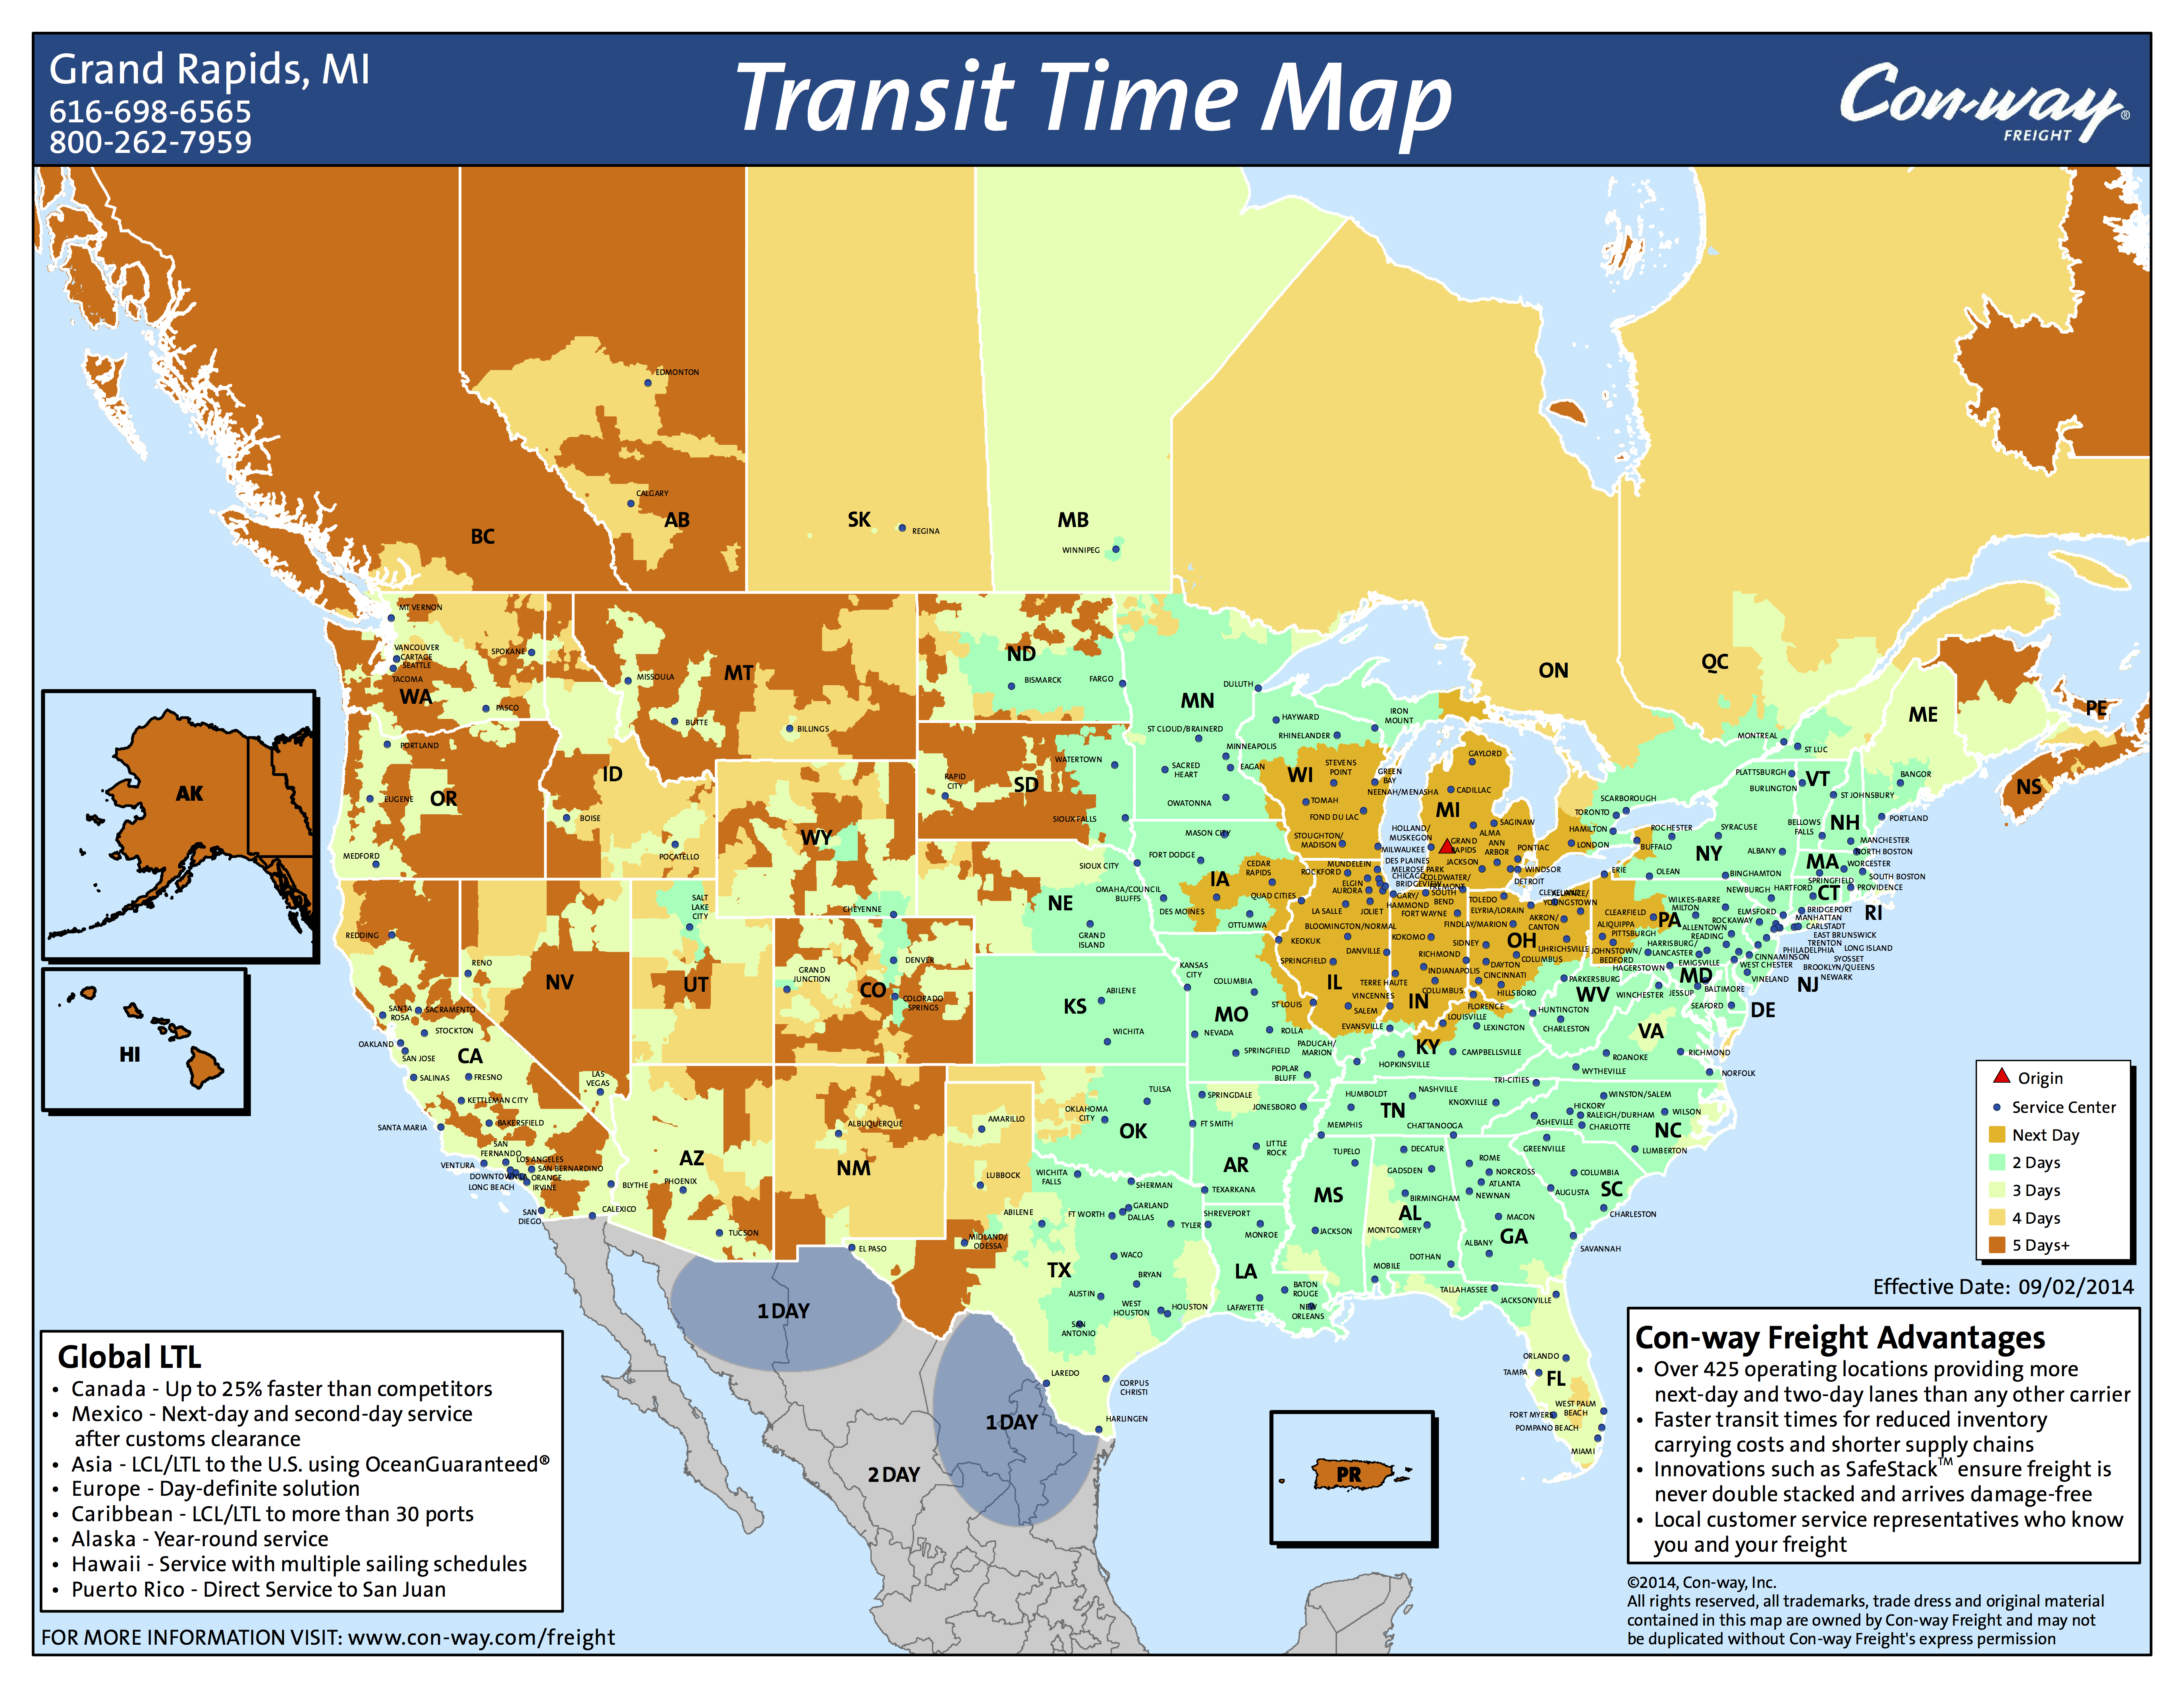 conway freight transit times